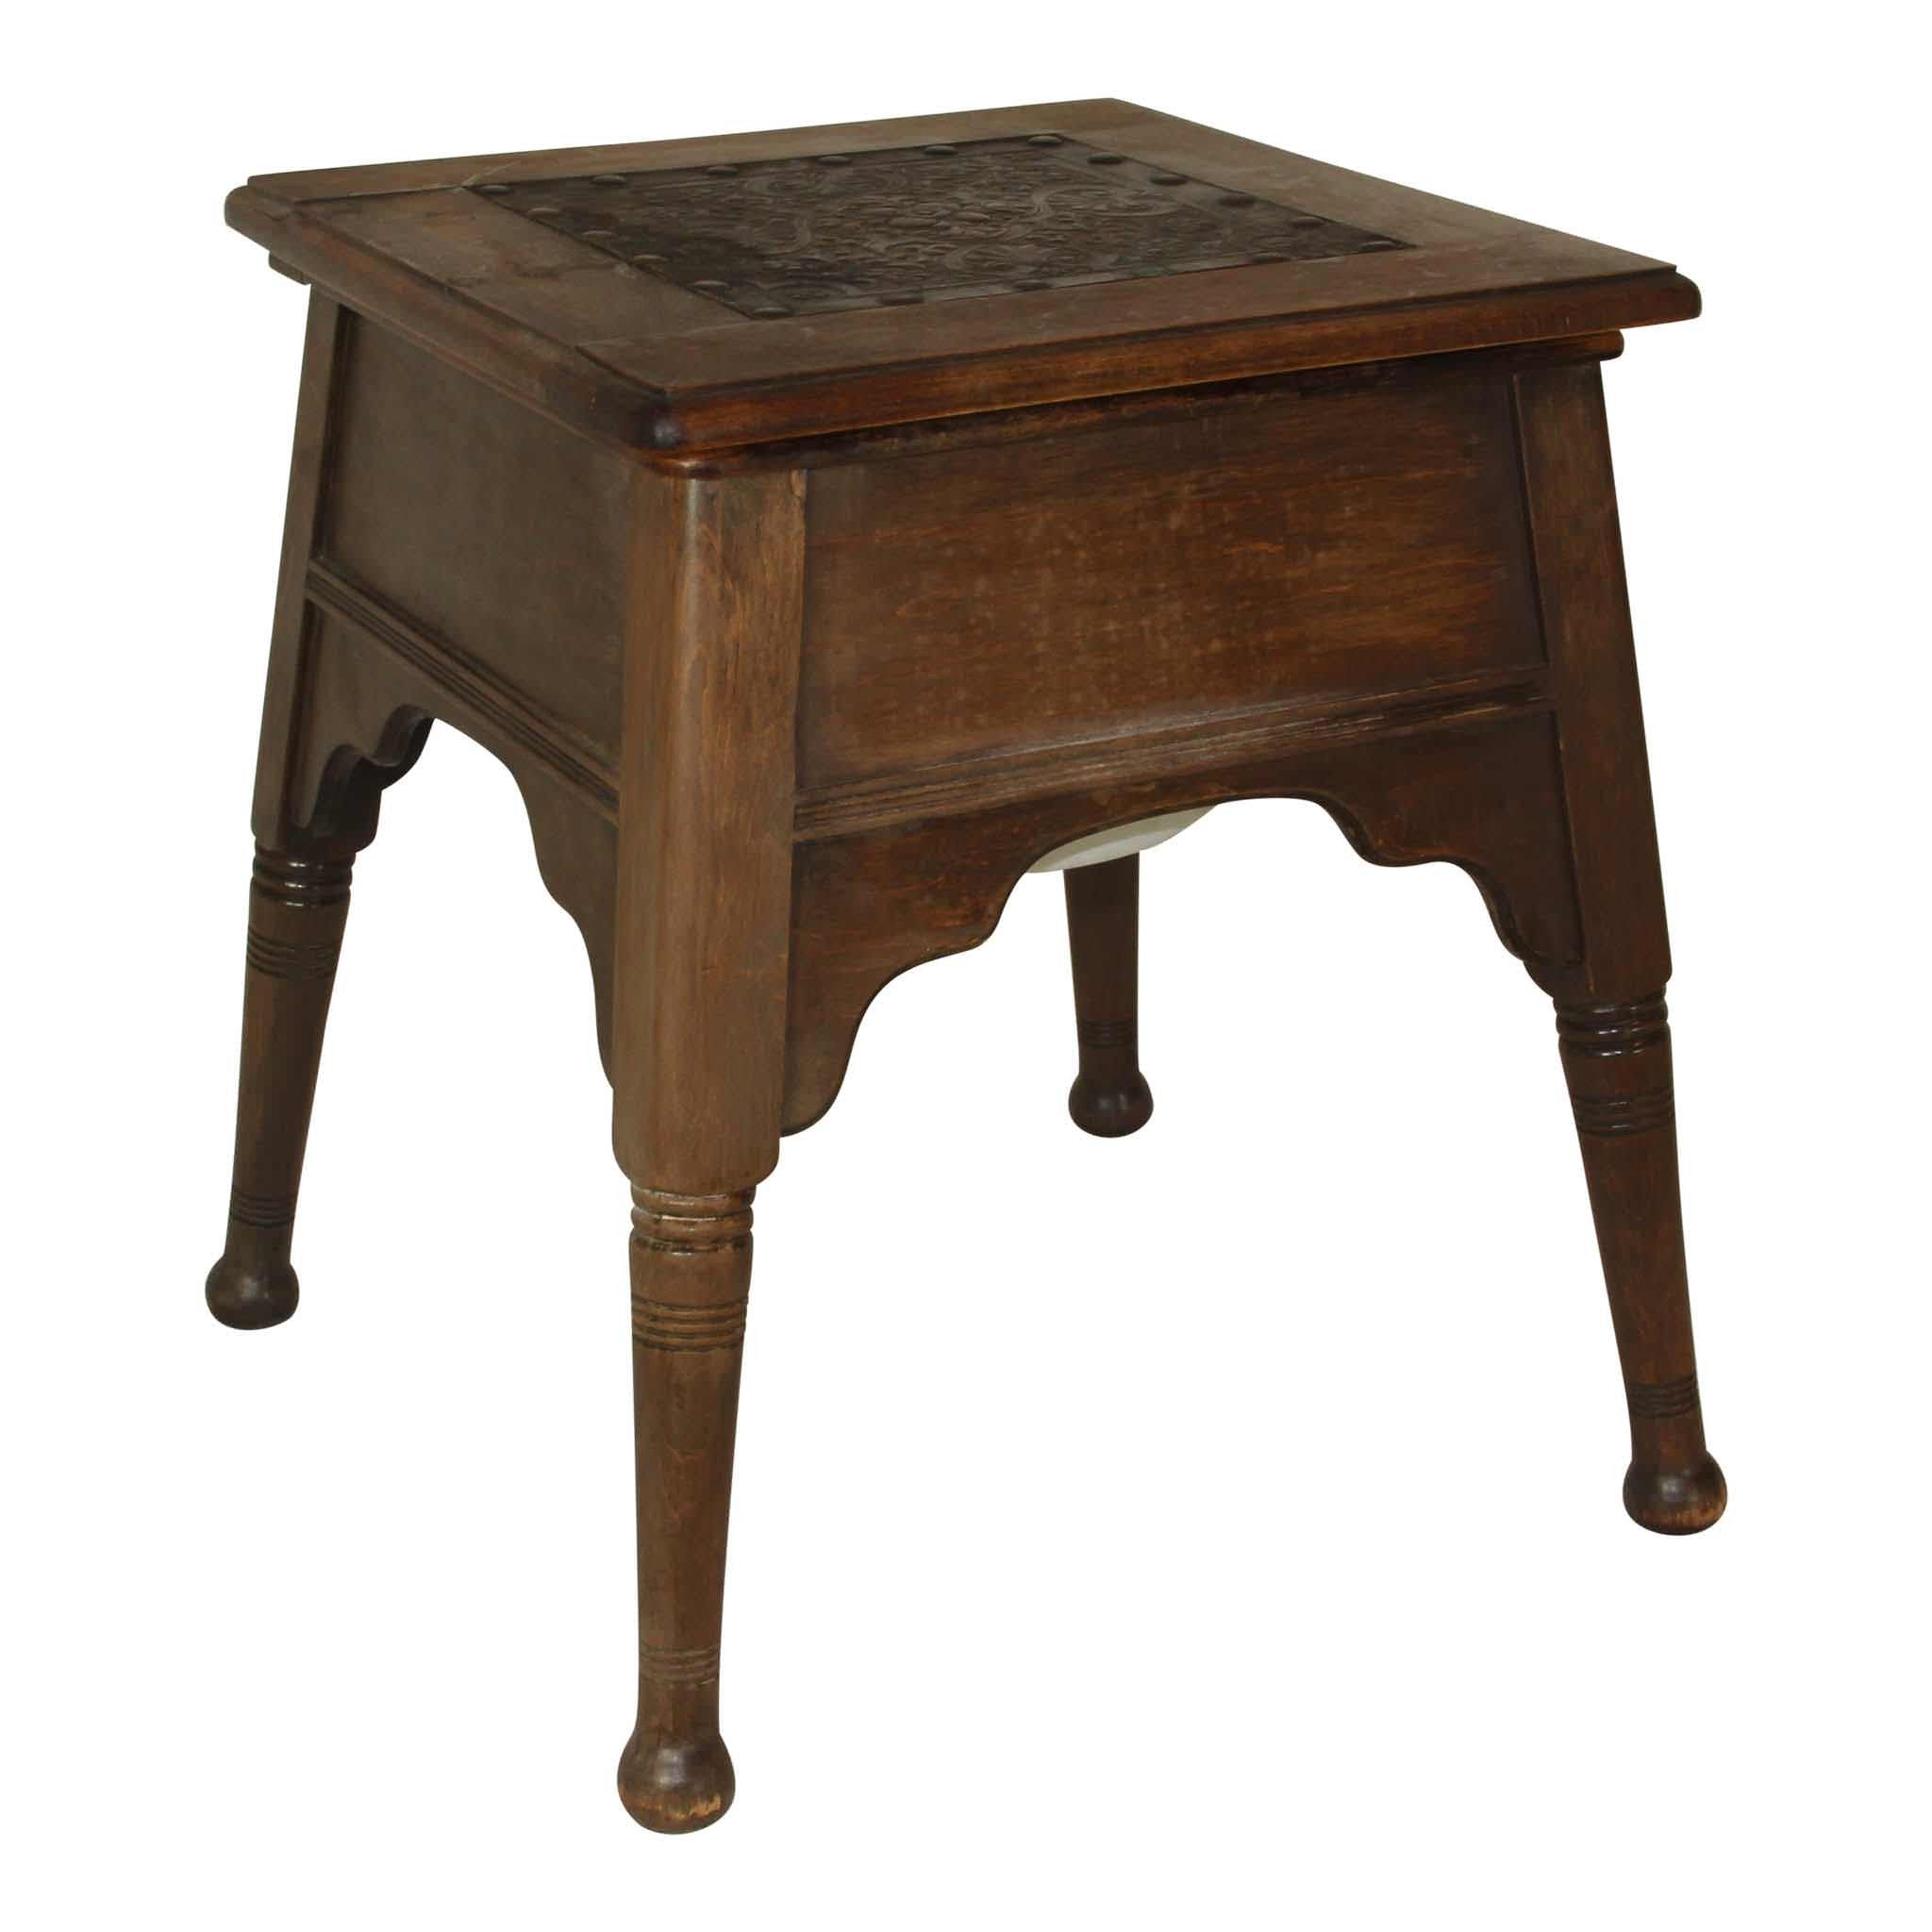 Table with Hidden Commode